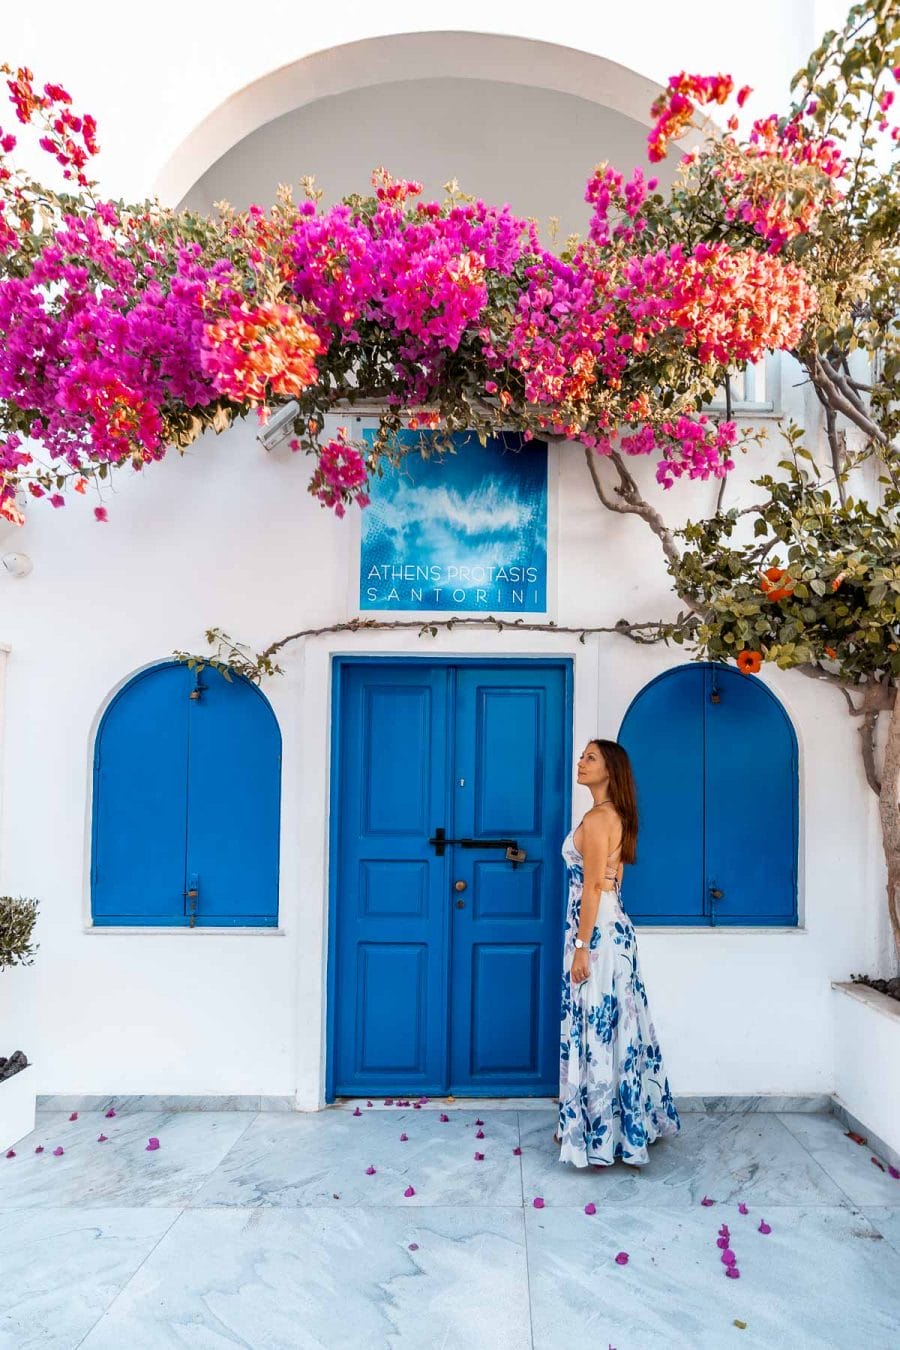 Girl standing at a Blue door with pink flowers in Oia, Santorini